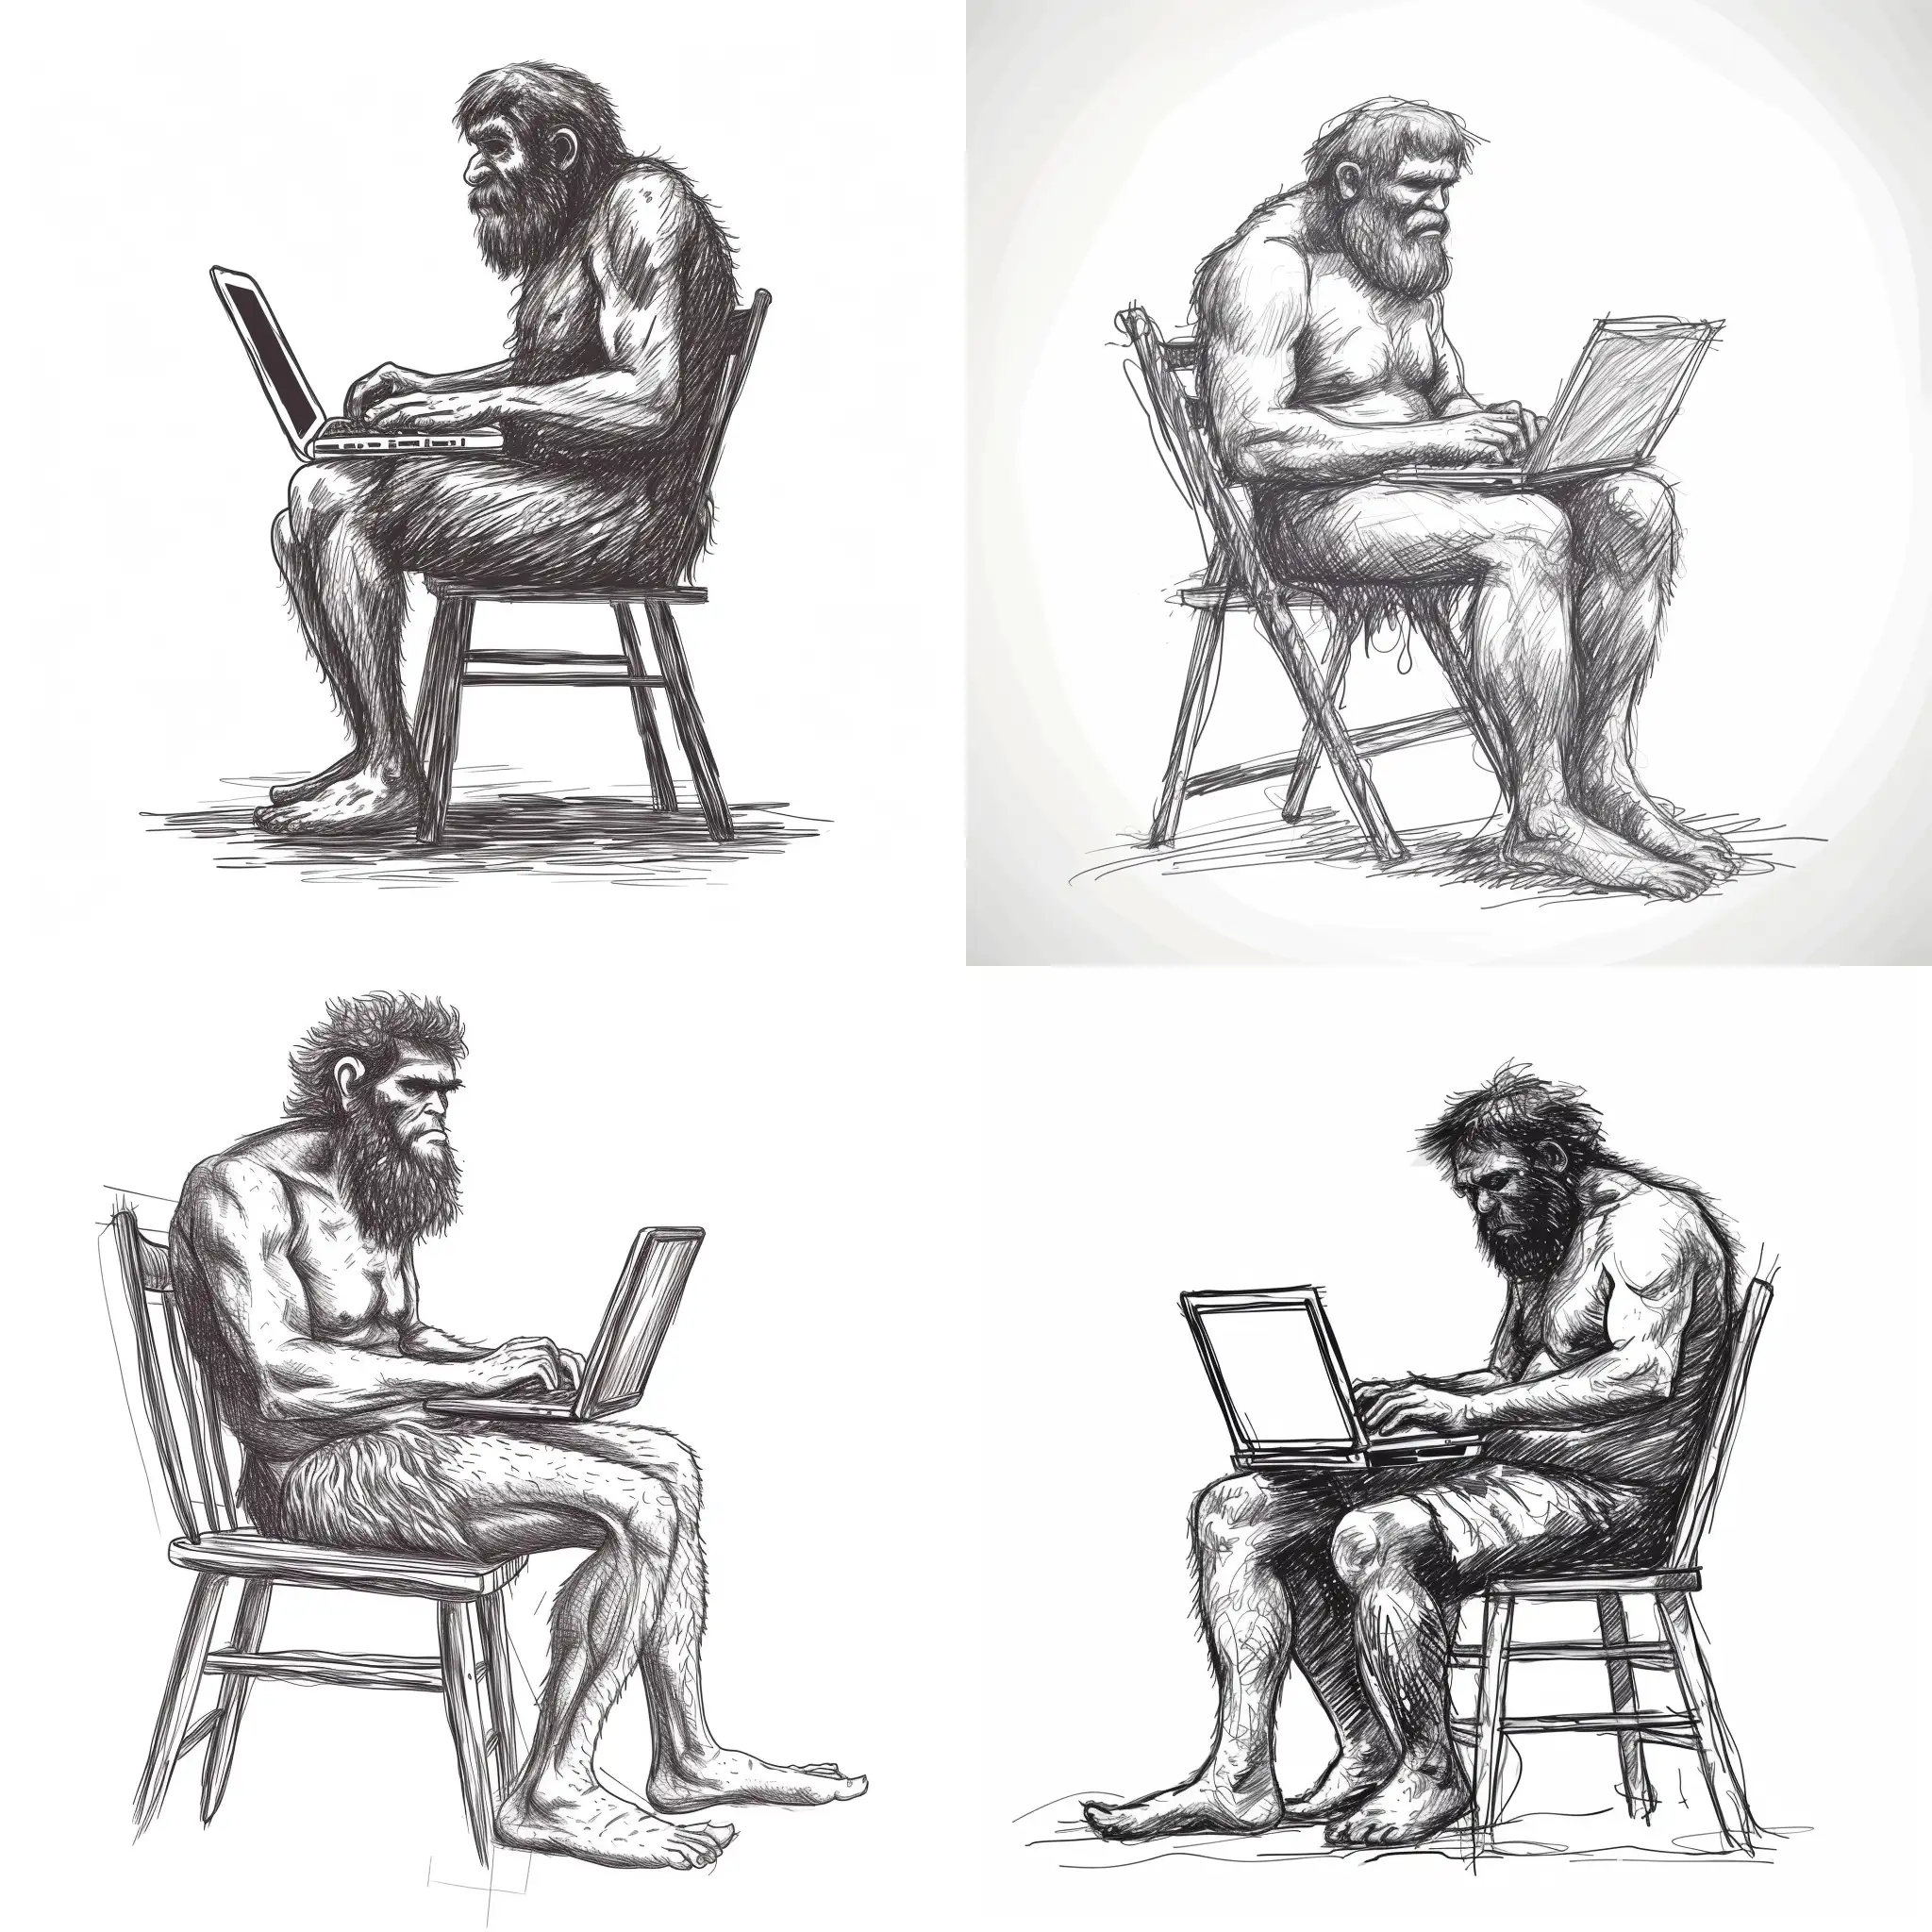 The caveman sitting  on chair and using laptop. Victor sketch drawing illustrator style on white background. 